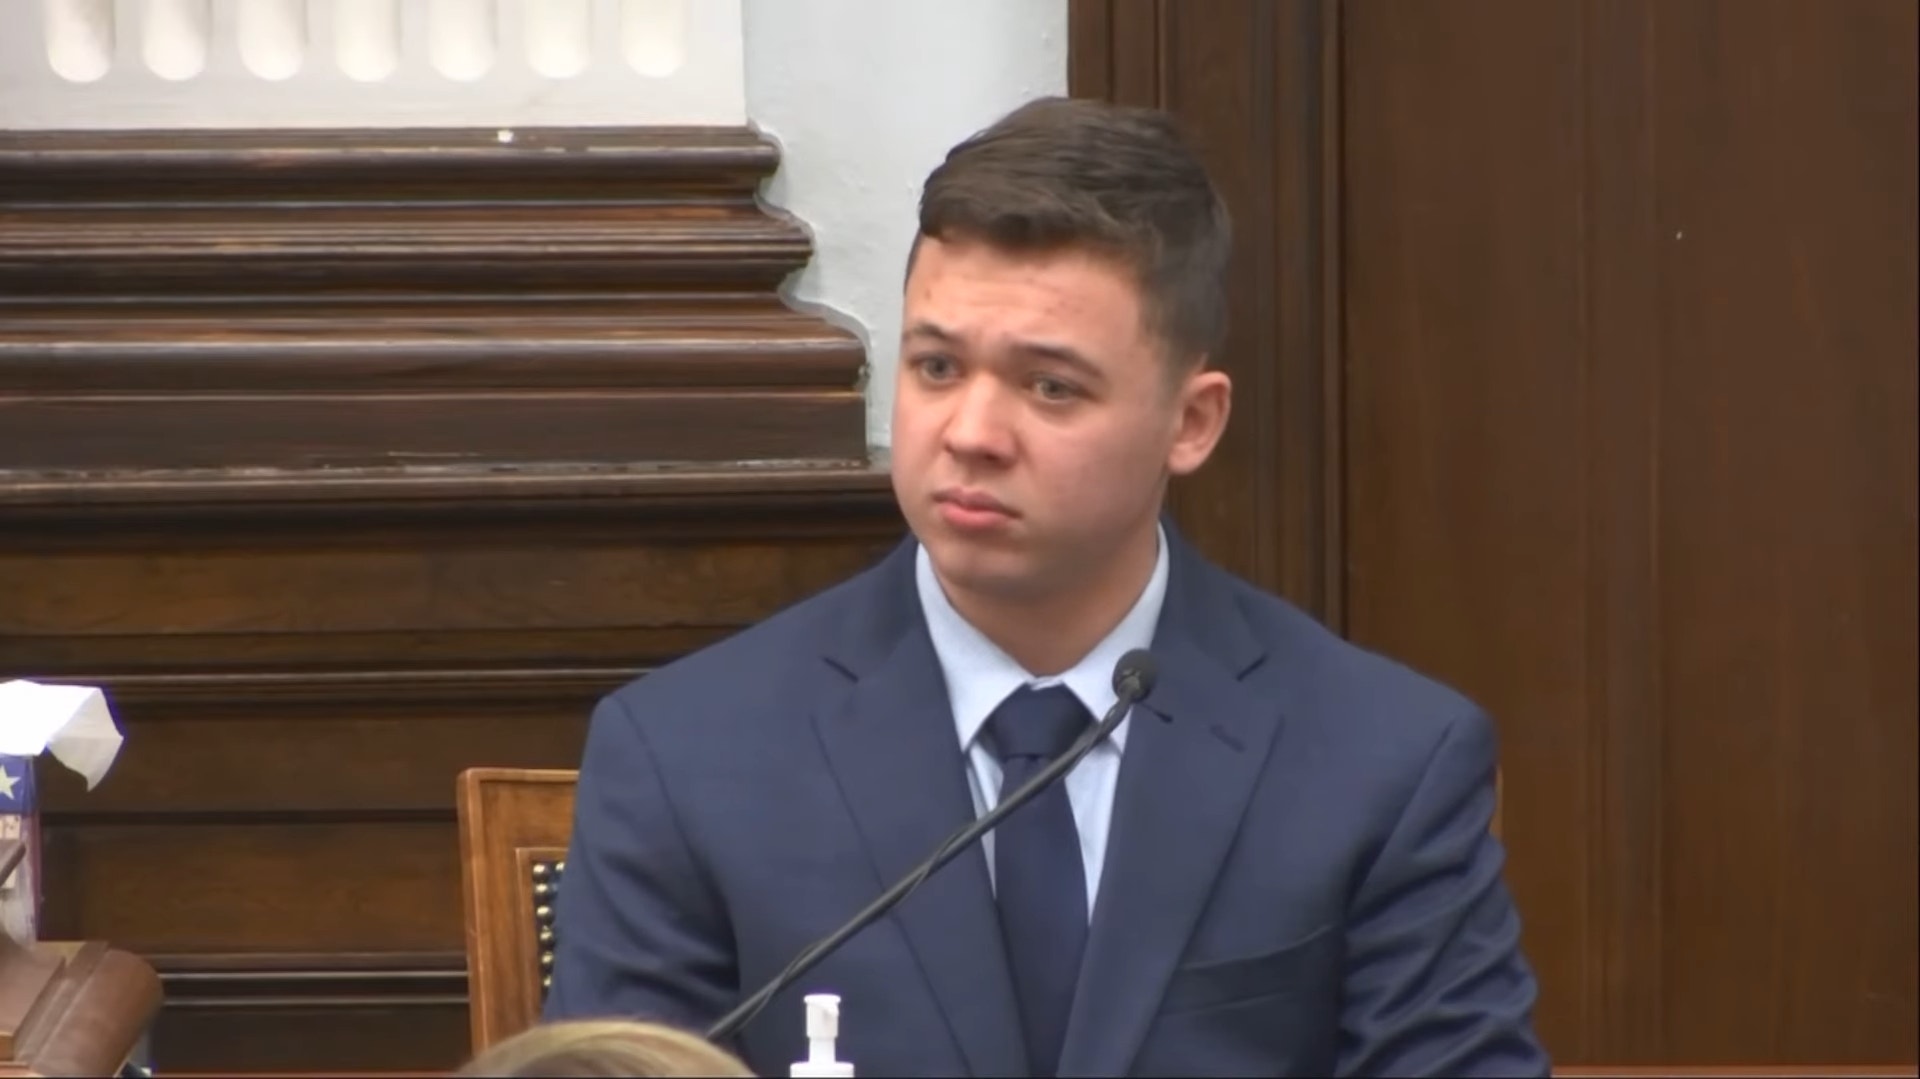 Kyle Rittenhouse on the stand testifying